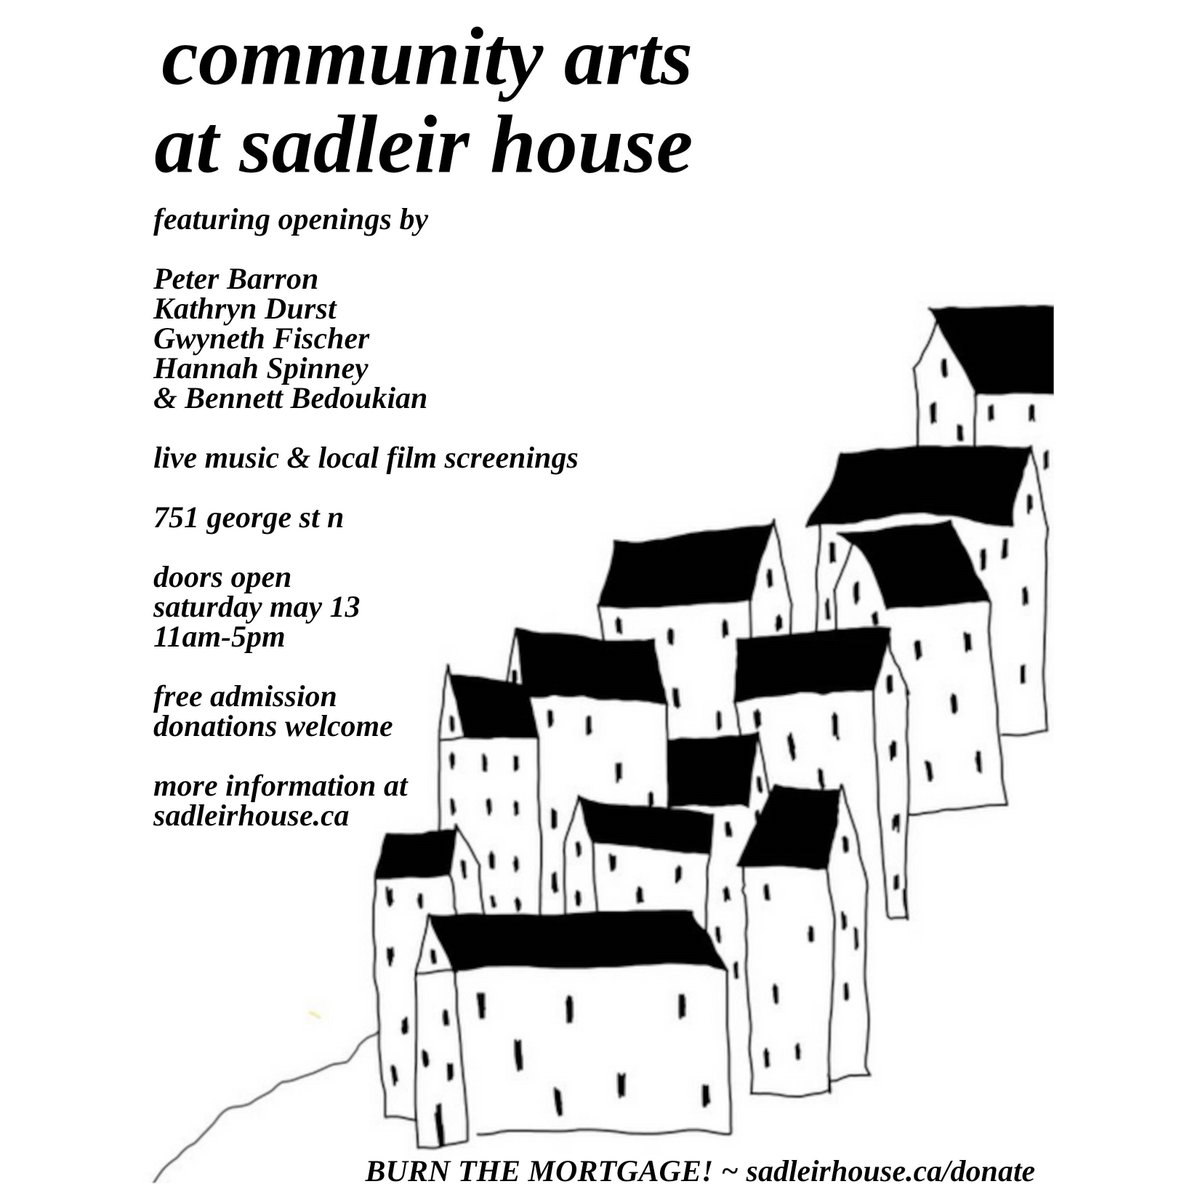 Community arts at Sadleir House this Saturday! Featuring opening by: Peter Barron Kathryn Durst Hannah Spinney Bennett Bedoukian. Live music and local film screenings. Free admission donations welcome.